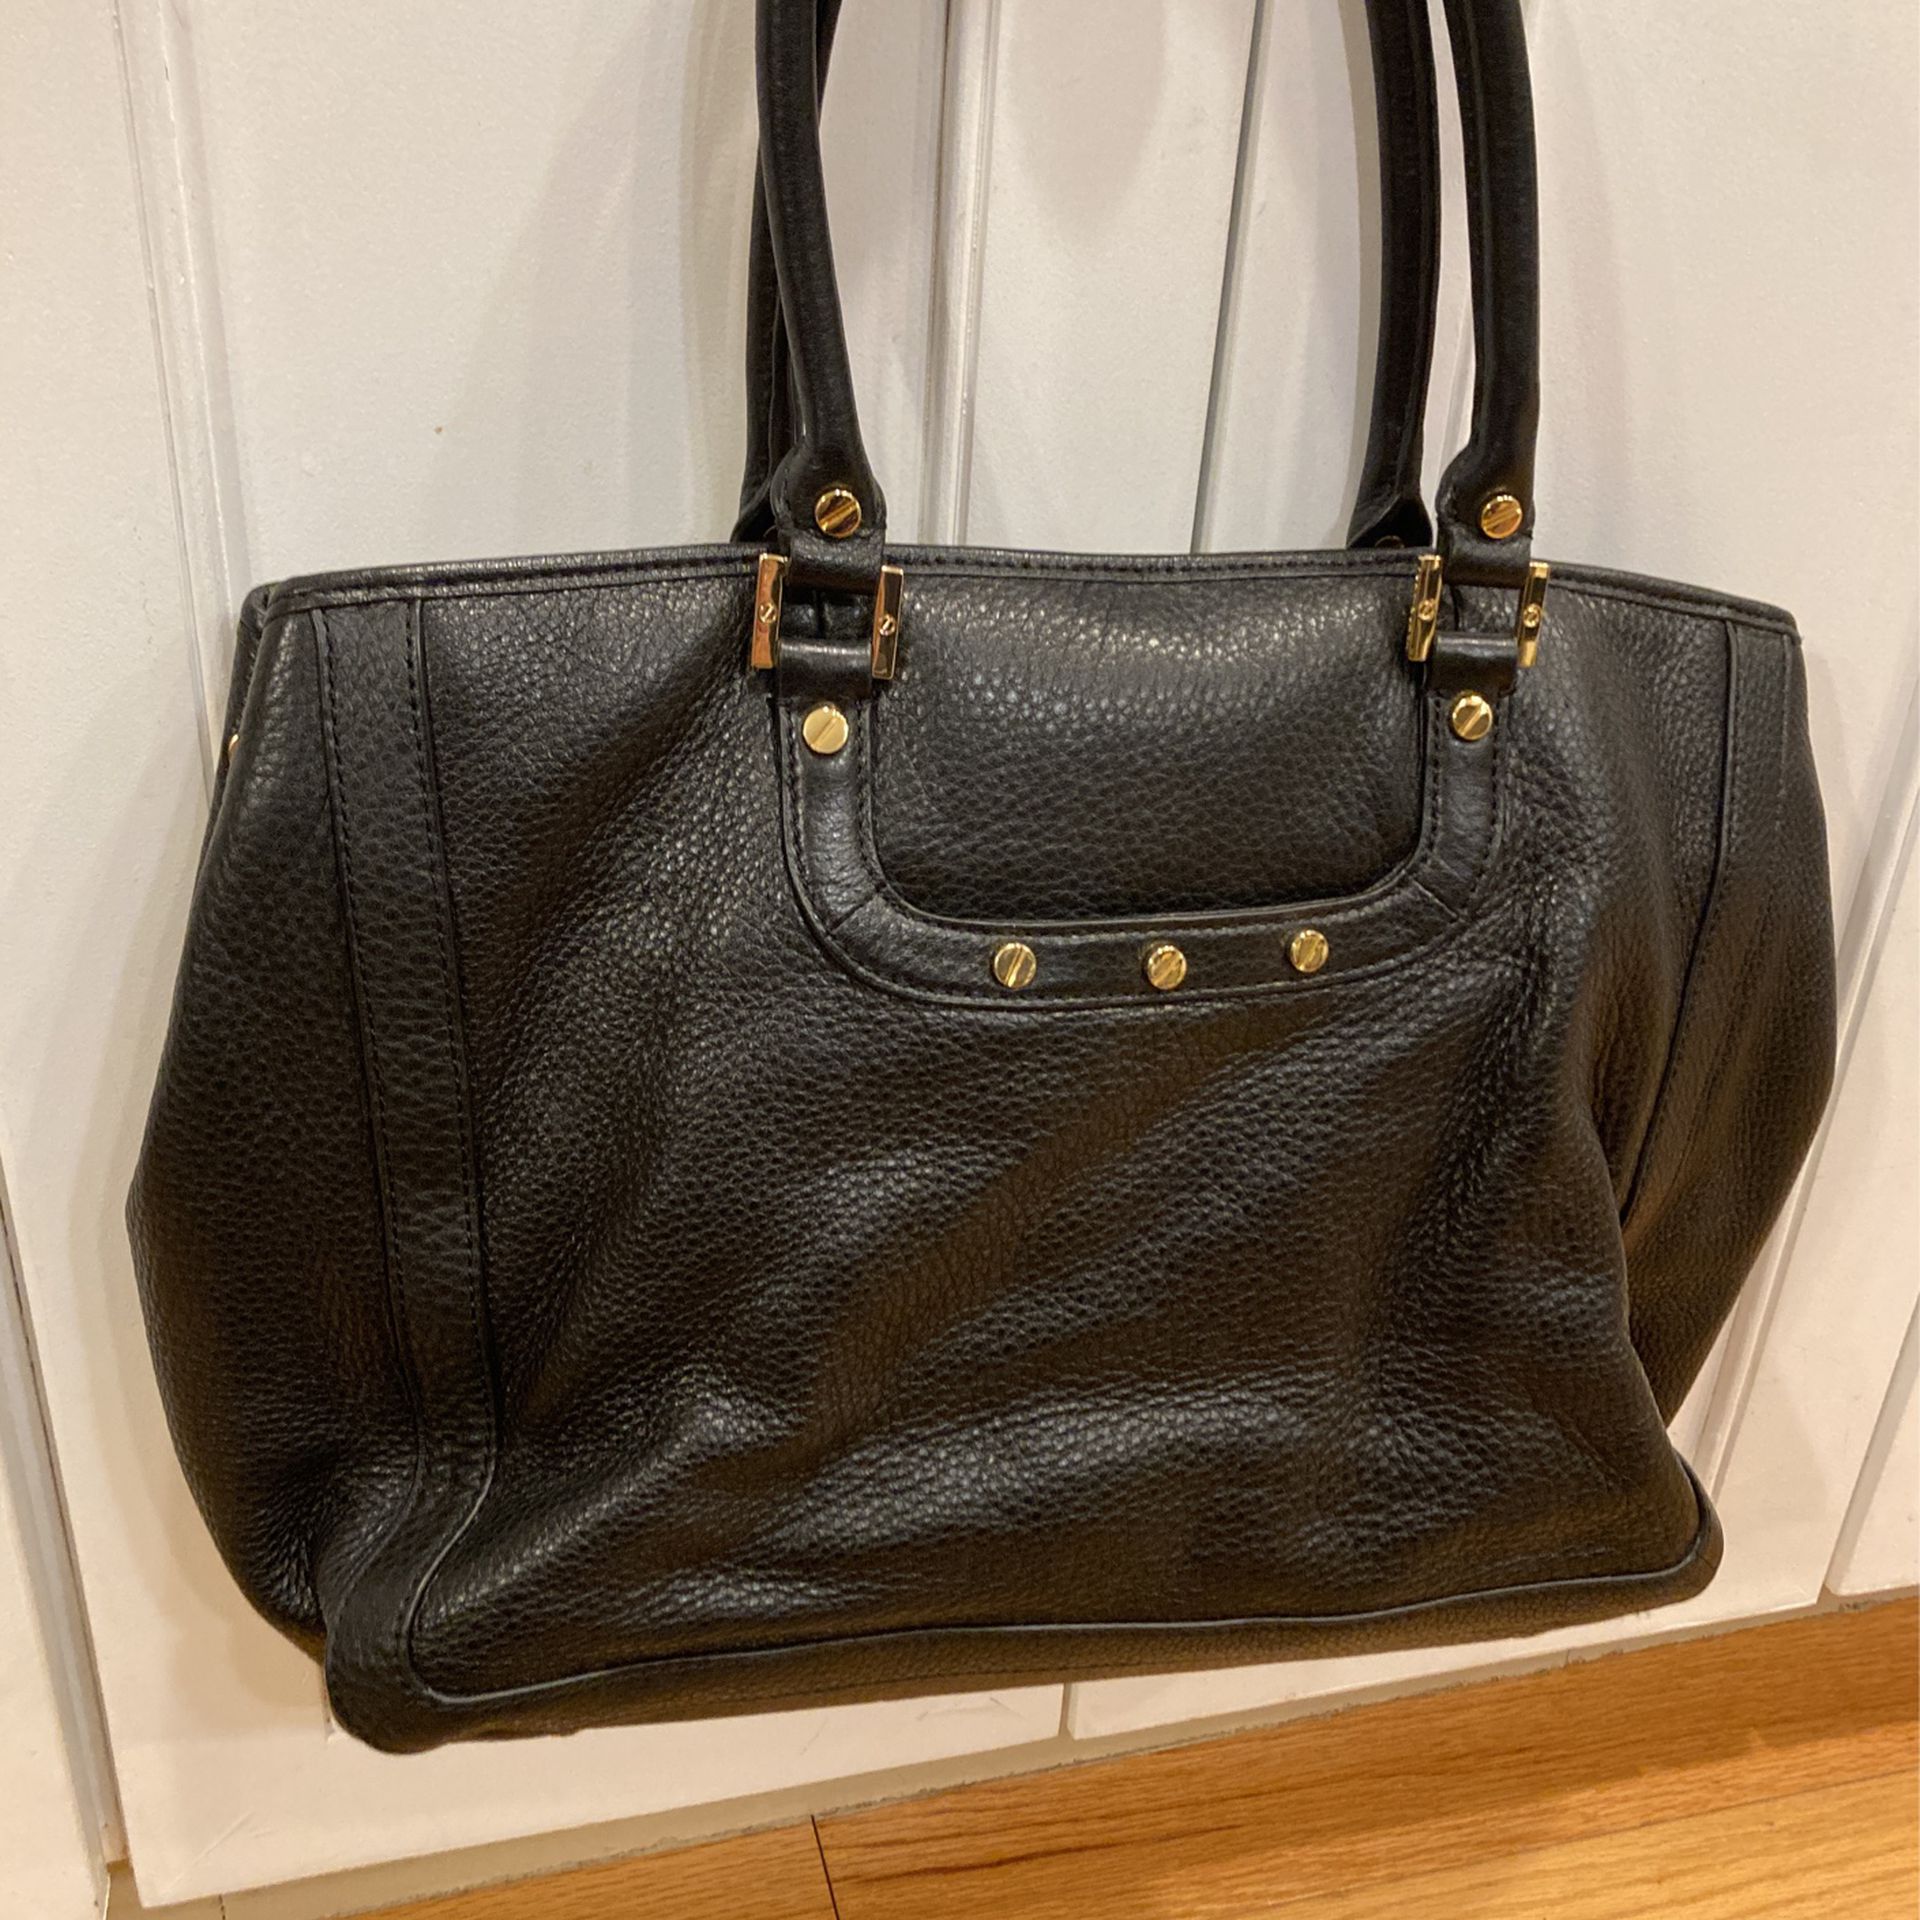 TORY BURCH LARGE BAG for Sale in Buffalo Grove, IL - OfferUp